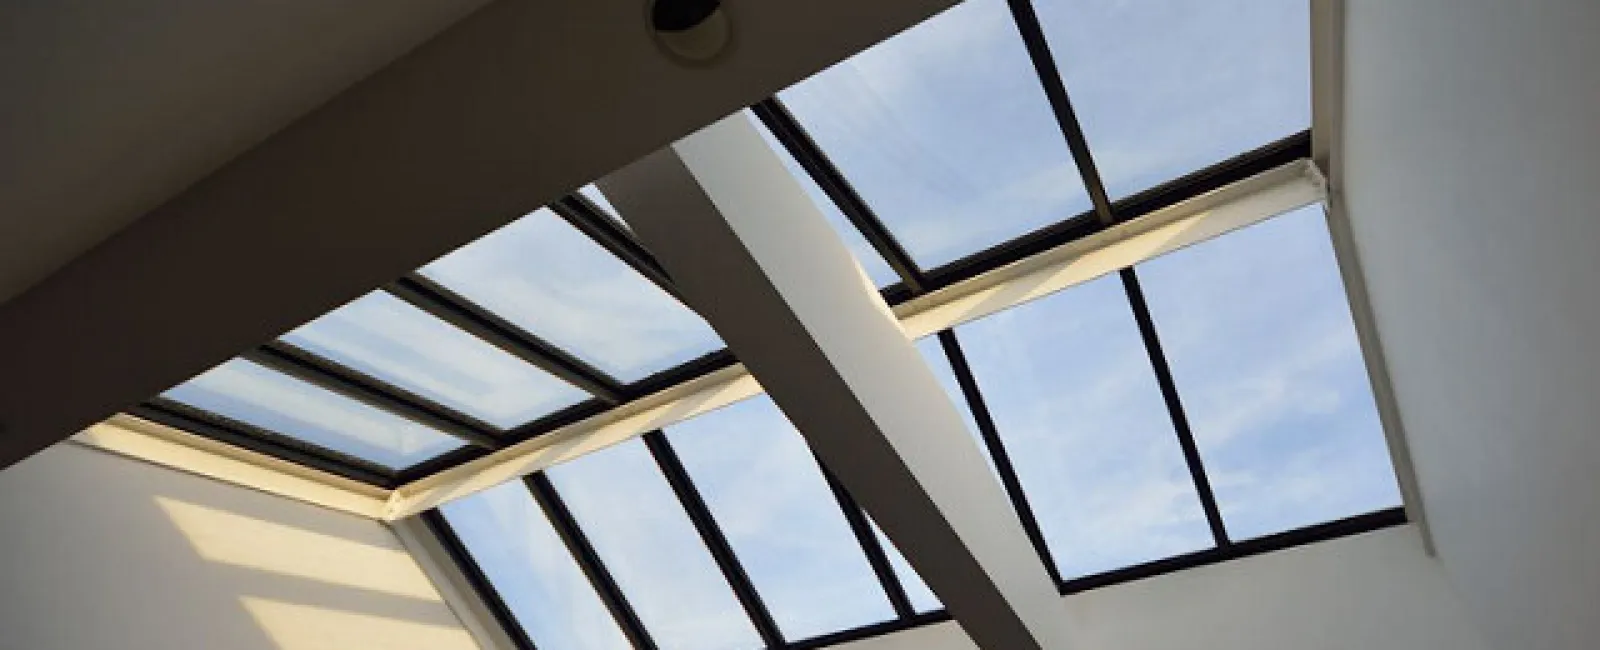 Skylight Installations: How Do They Affect My Roof?